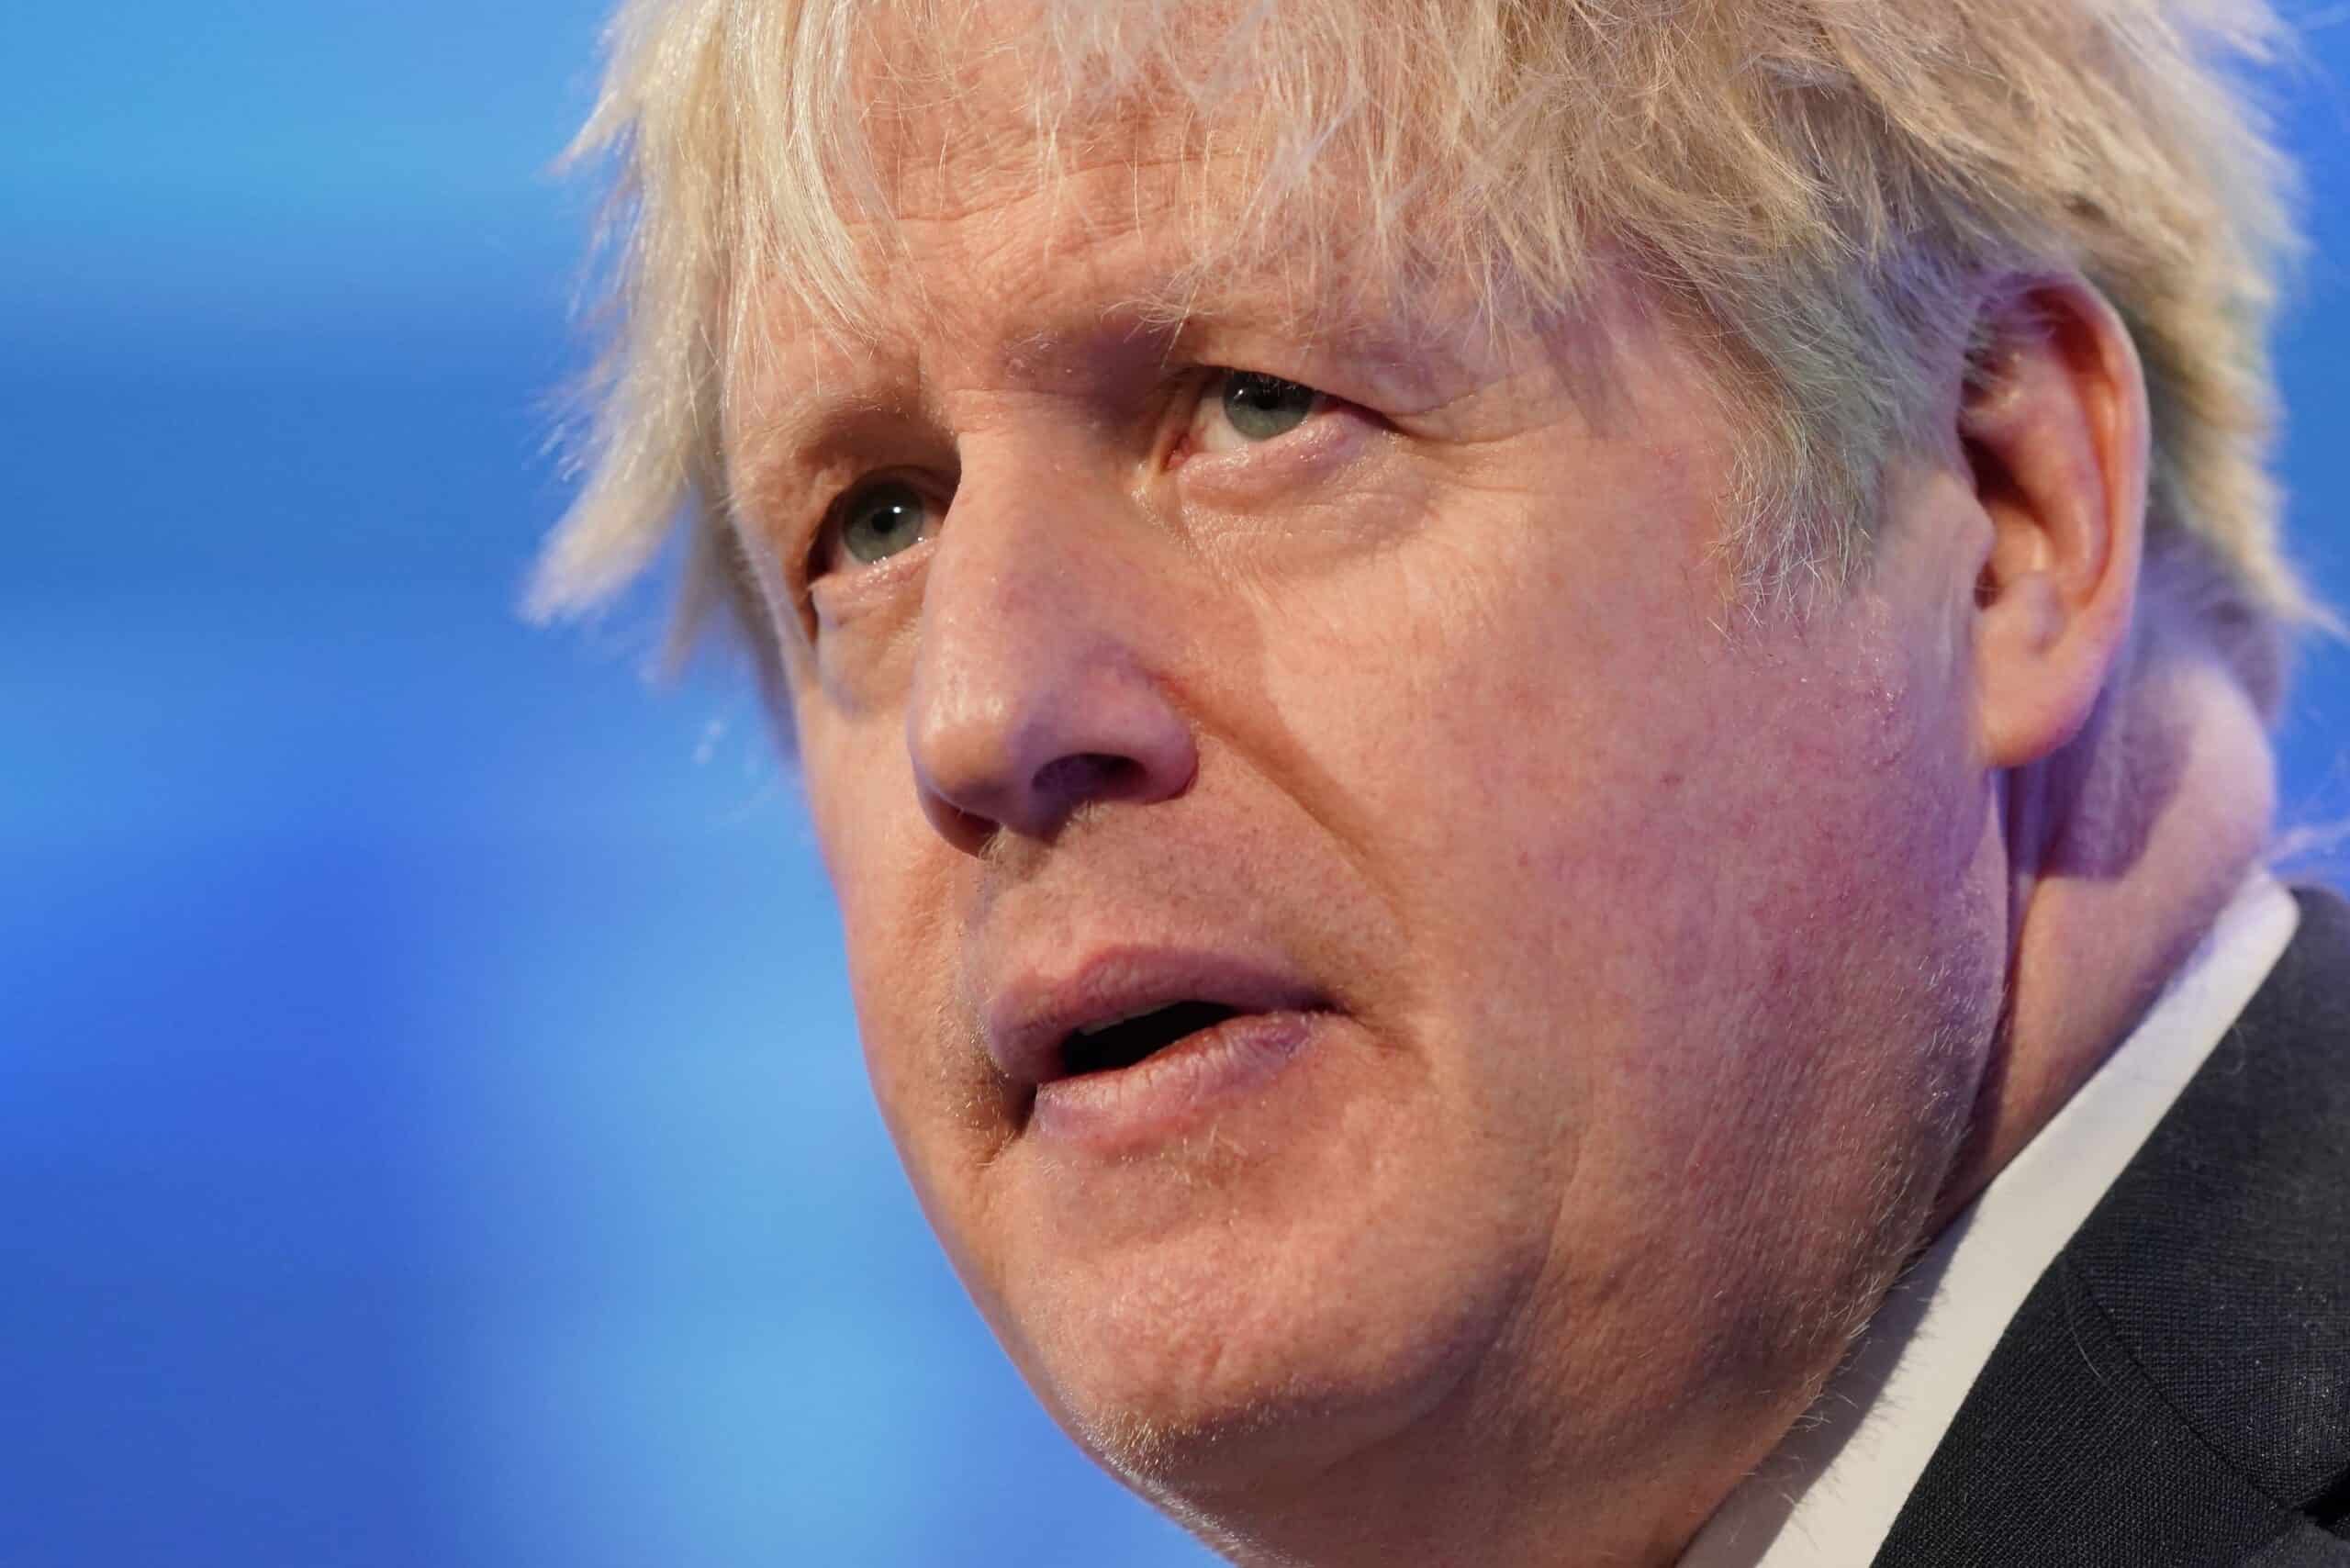 Johnson’s partygate defence ‘complete and utter nonsense’, say Covid bereaved